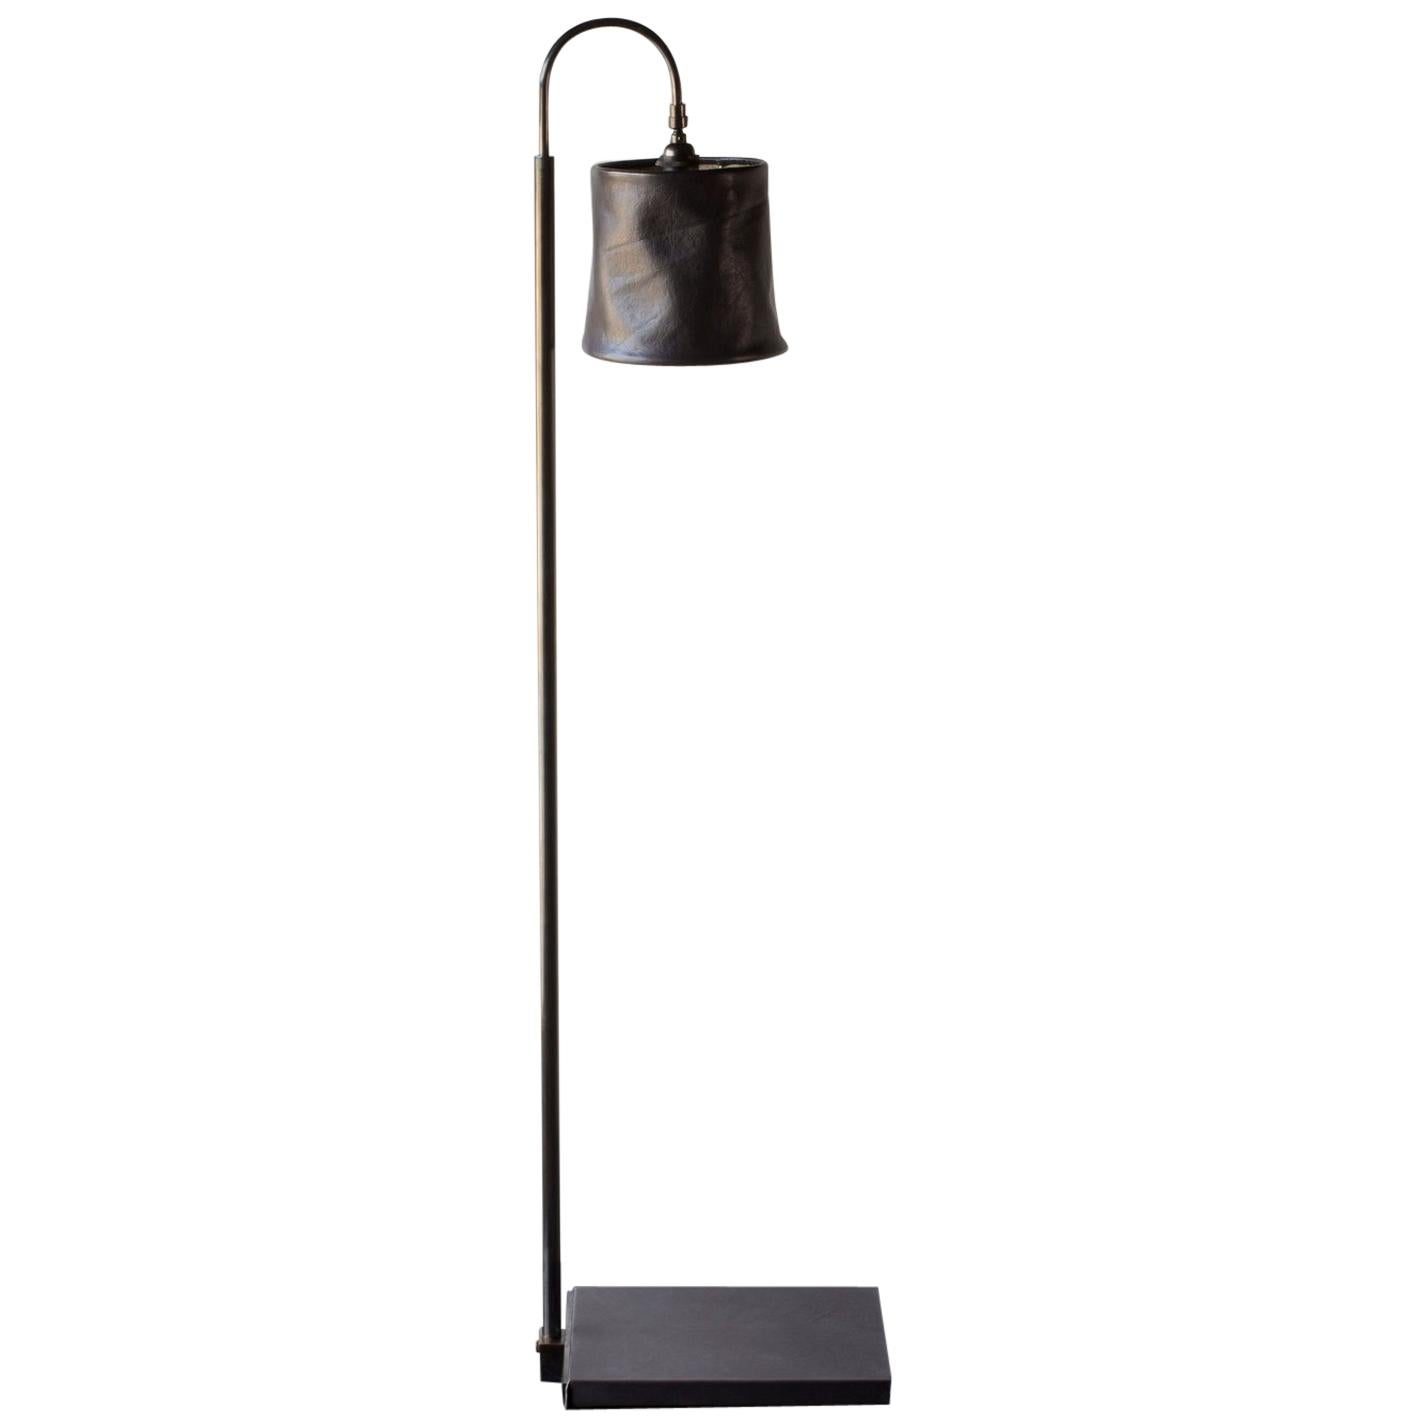 Series01 Floor Lamp, Hand-Dyed Sable, Brown Leather, Dark Patinated Brass For Sale